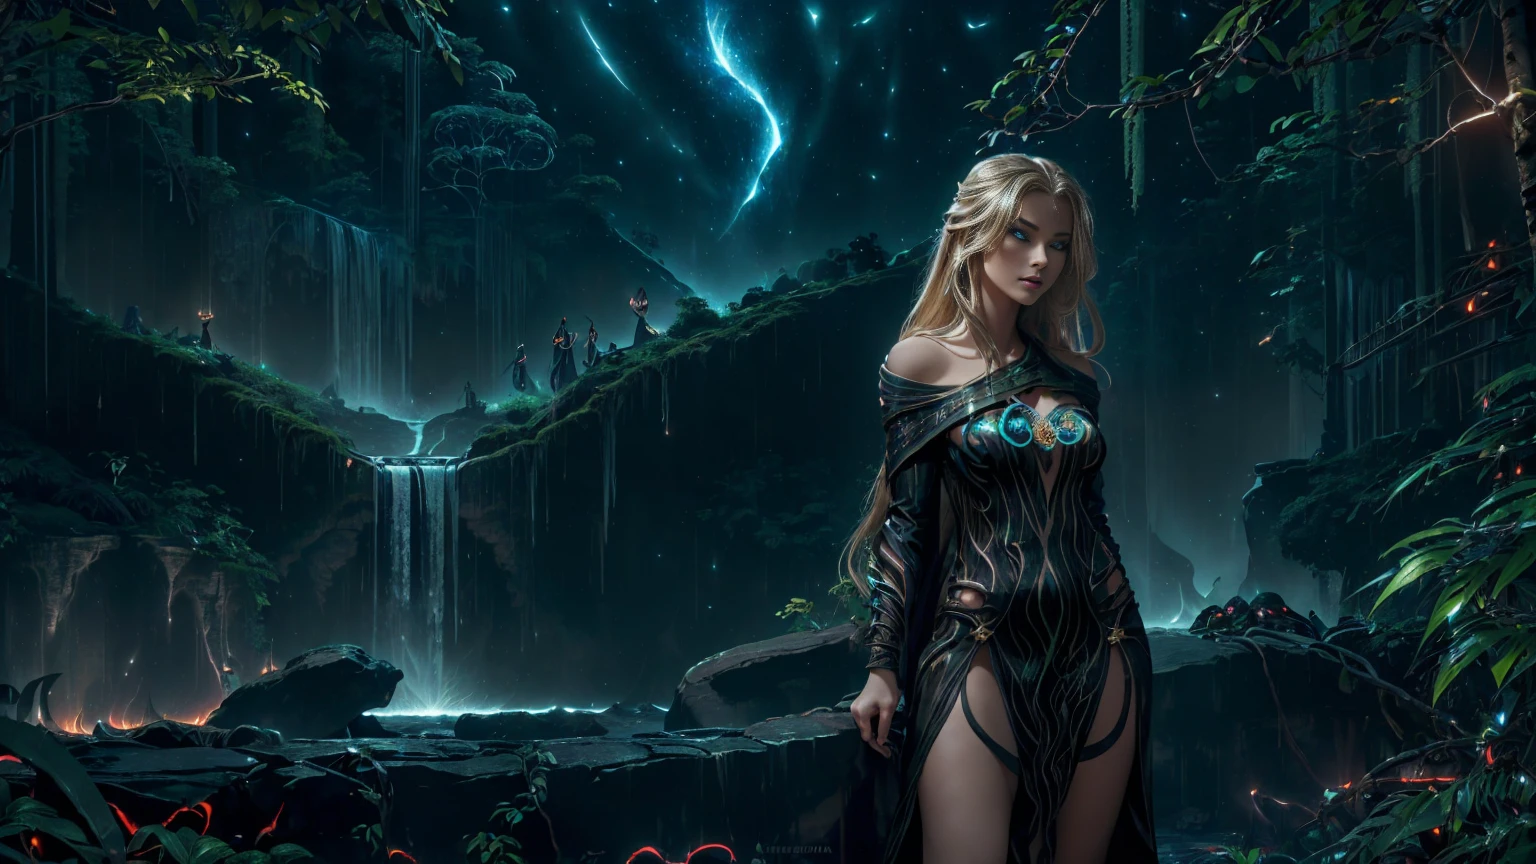 A stunning Russian beauty stands at the edge of (massives waterfalls:1.3), her blonde hair blowing gently in the misty air. Her piercing blue eyes sparkle as she gazes up at the star-filled sky, where a (supernova and galaxy :1.3) casts an otherworldly glow. The (jungle:1.5) around her is dark and mysterious, illuminated only by the soft flicker of a (brasero's flames) in the (dark night:1.8). She wears a beautiful short (black tube dress) that hugs her perfect body, highlighting every curve and contour as she poses confidently in front of the roaring waterfalls.